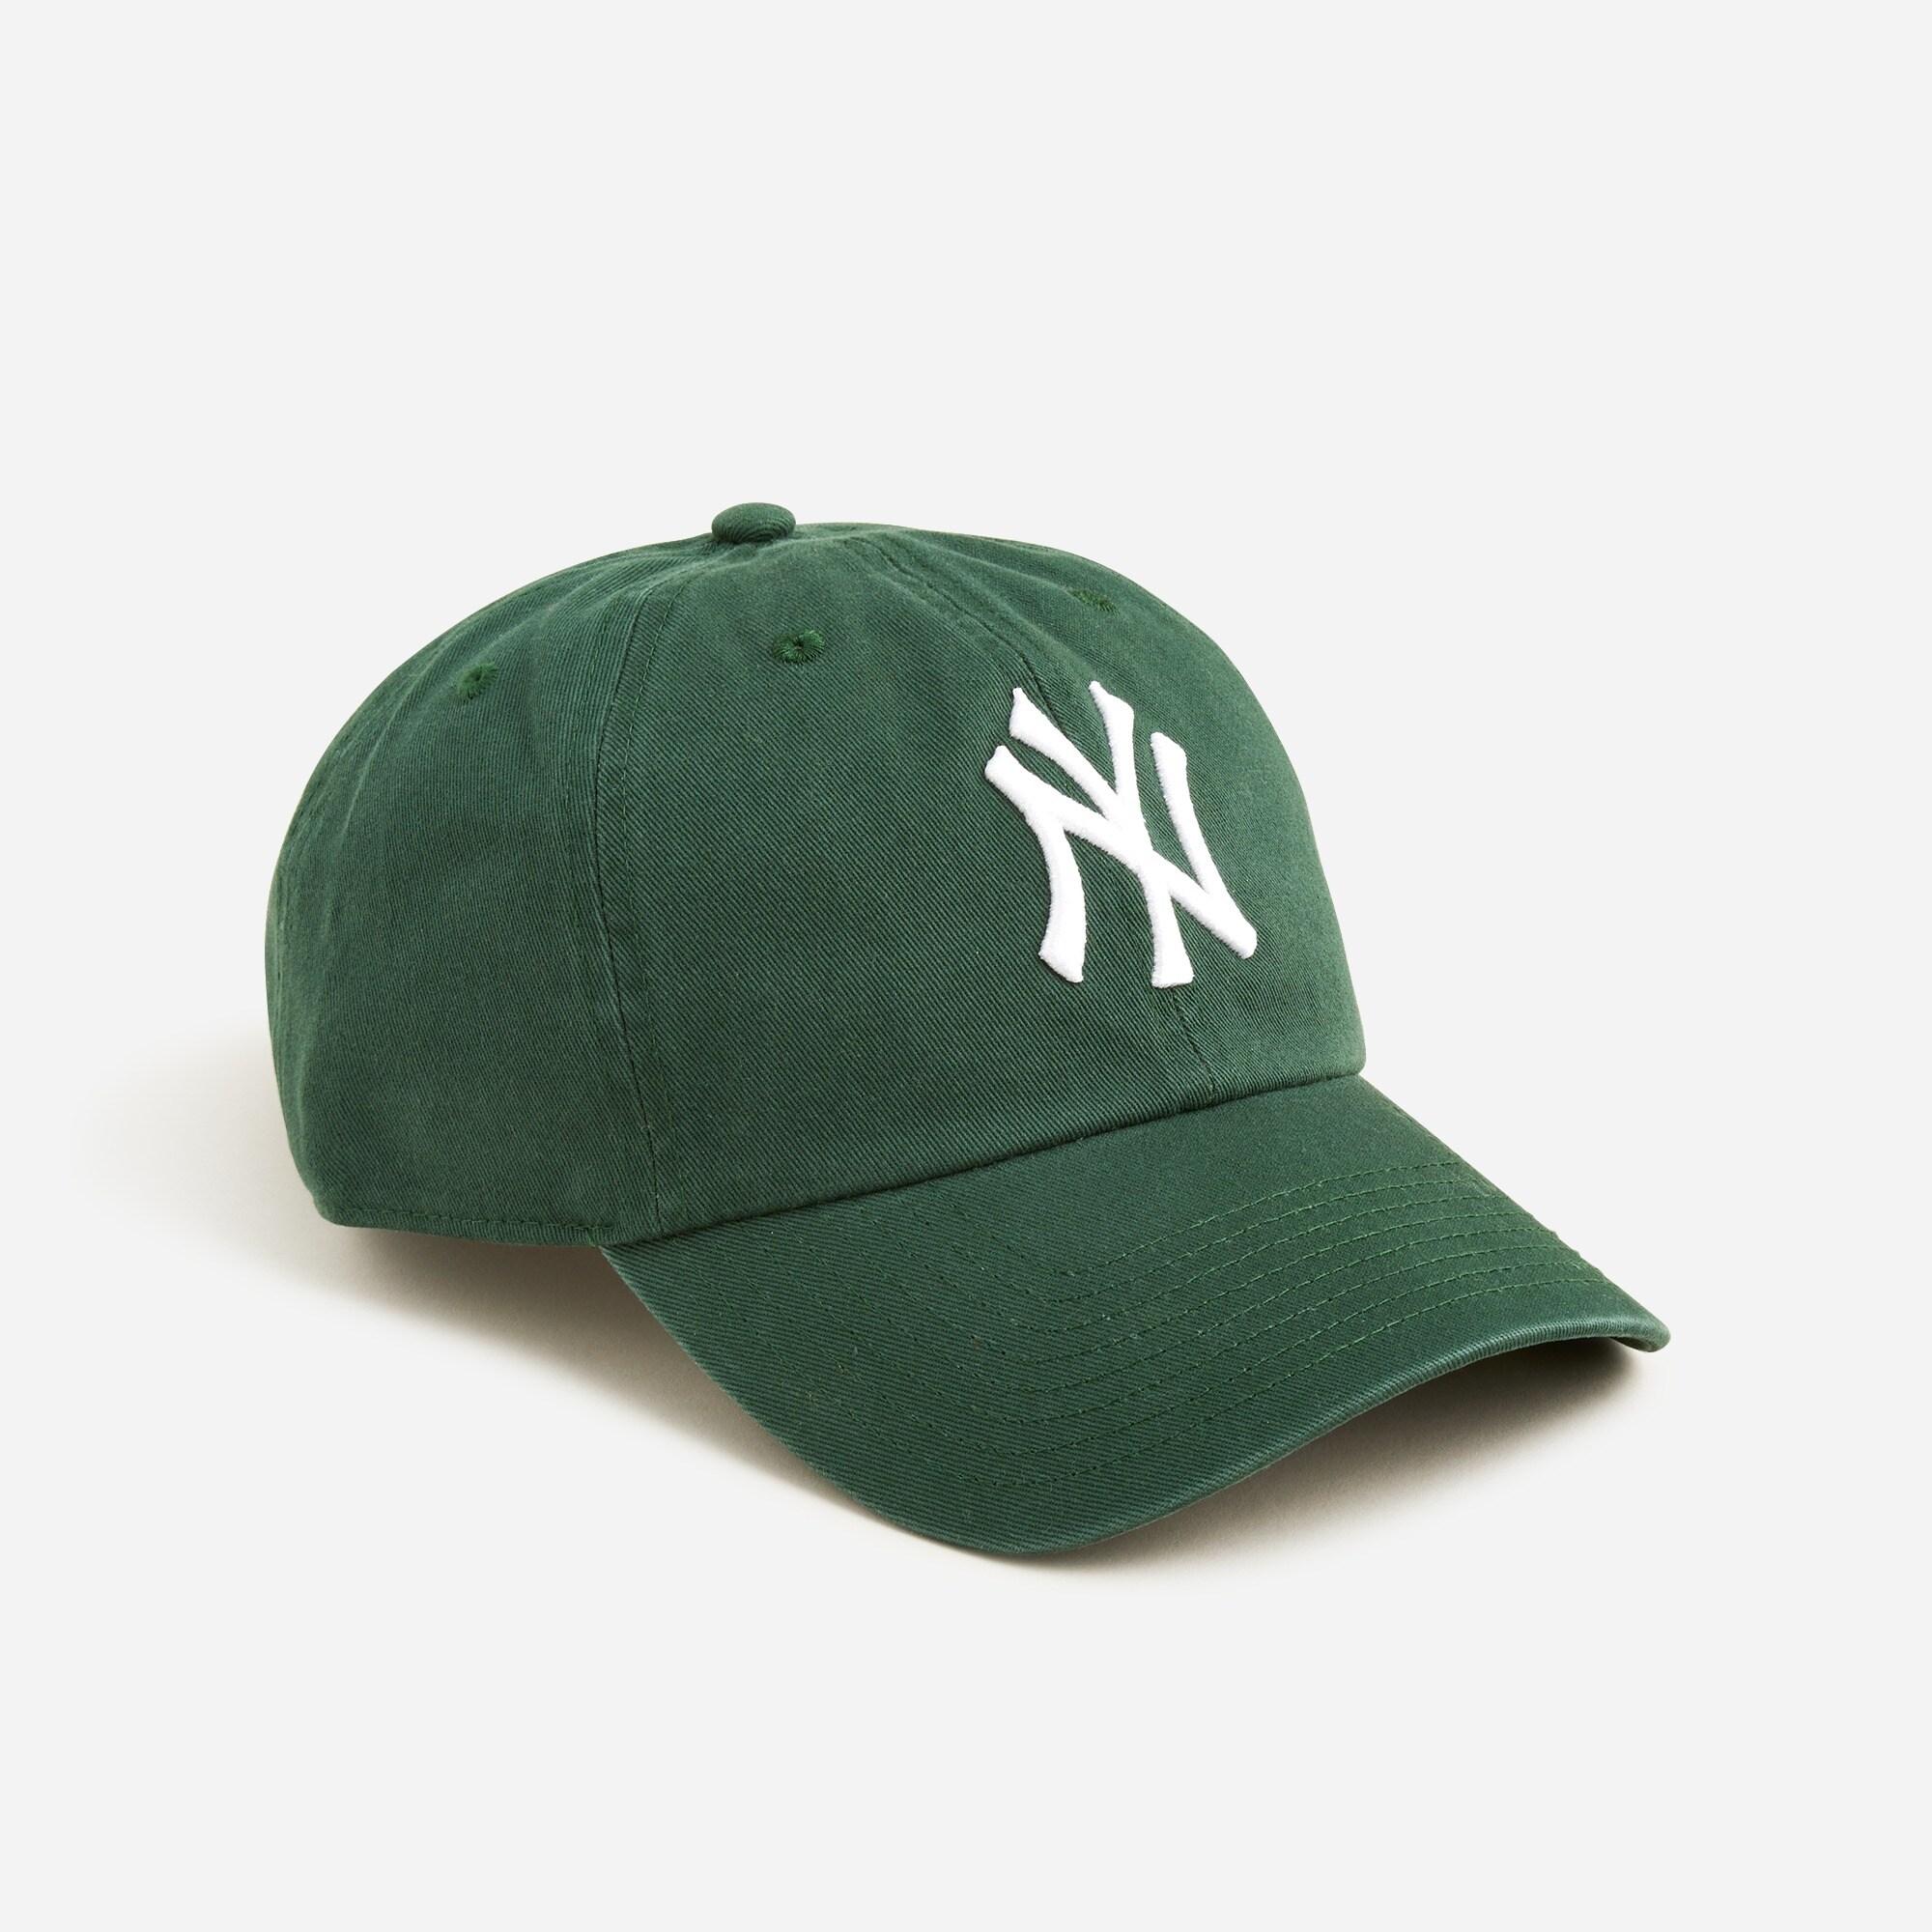  '47 Brand kids' cleanup cap in garment-dyed twill